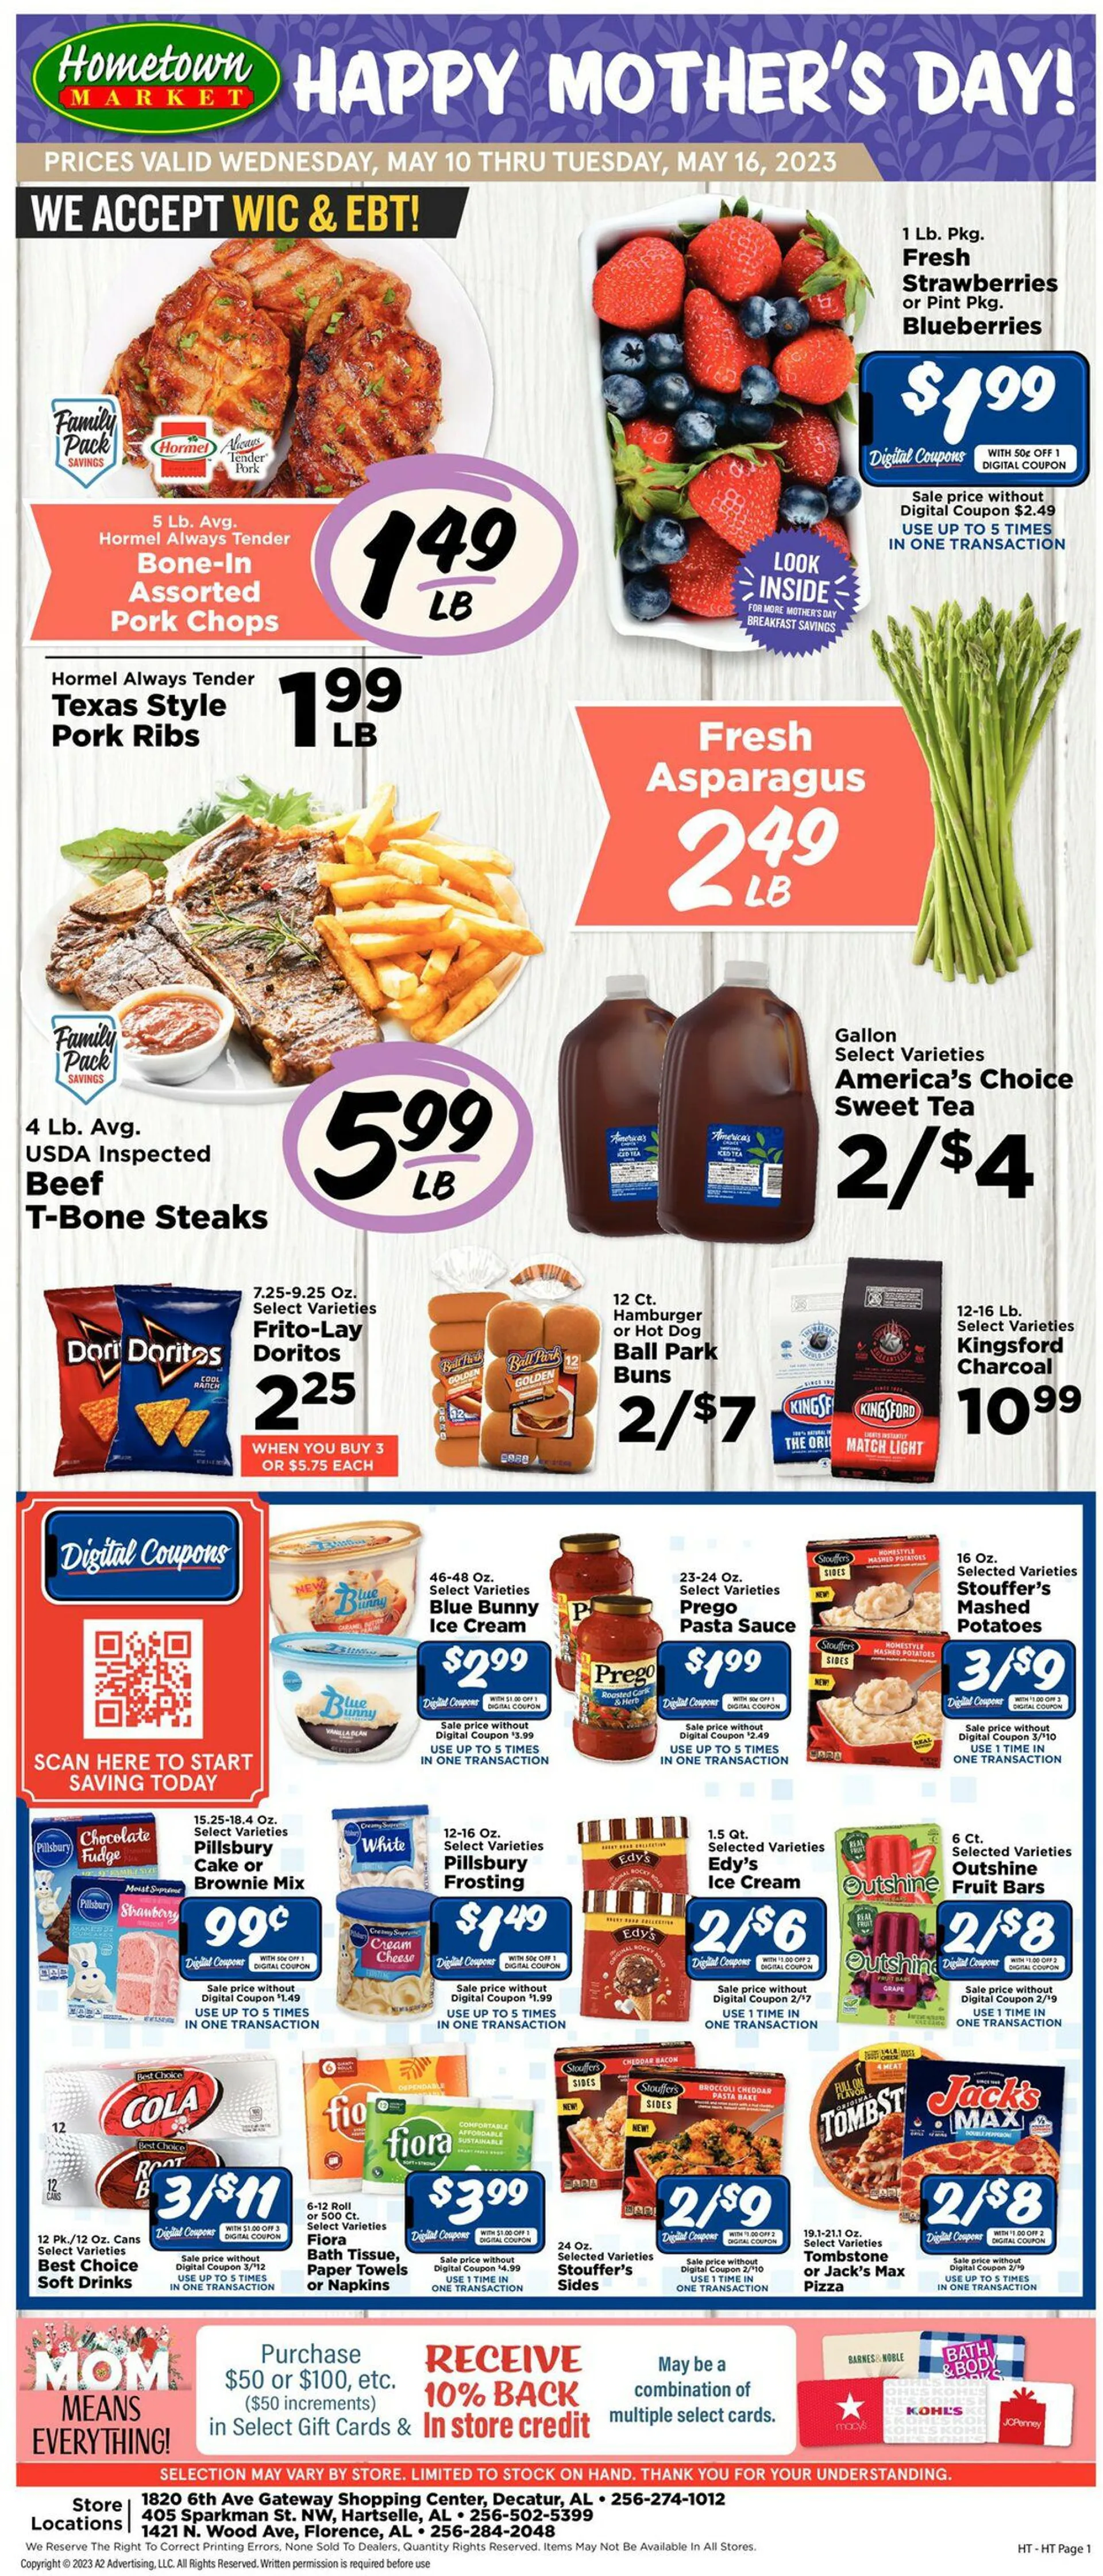 Hometown Market Current weekly ad - 1